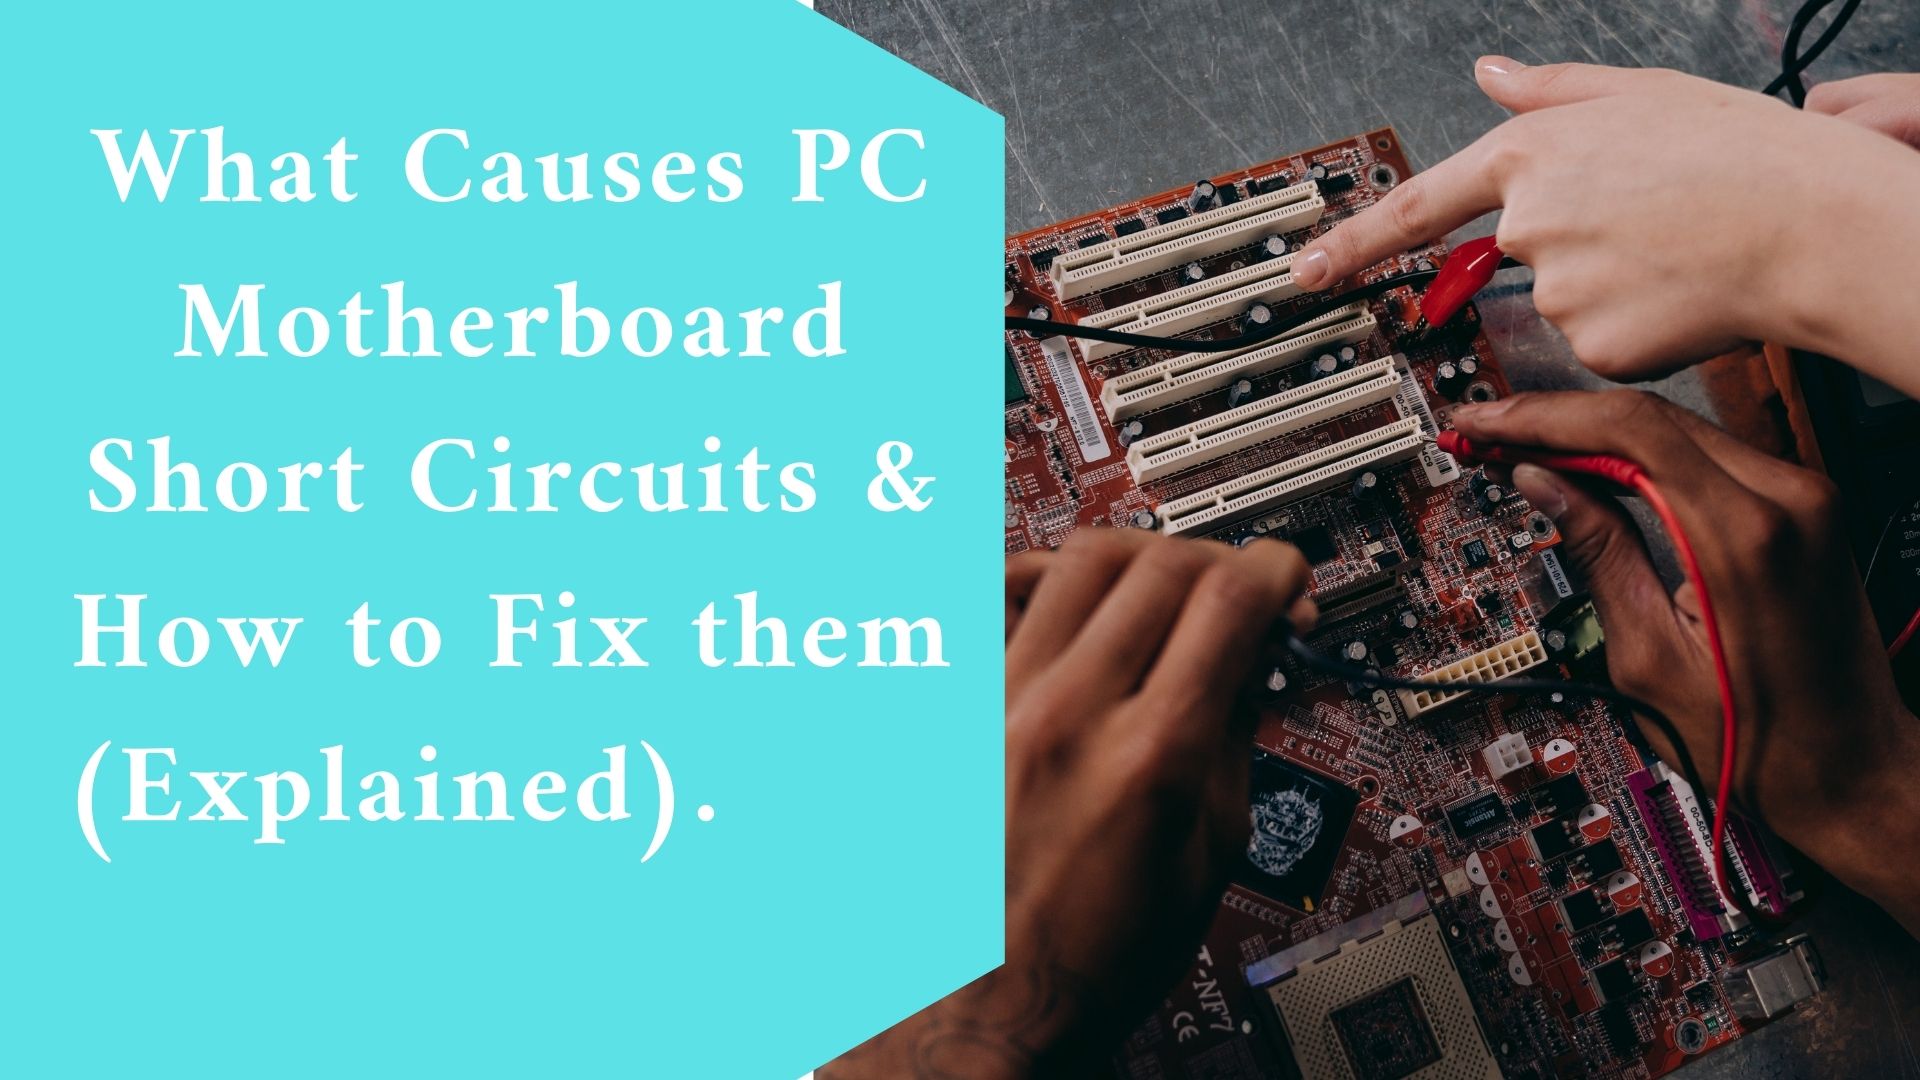 What Causes PC Motherboard Short Circuits & How to Fix them